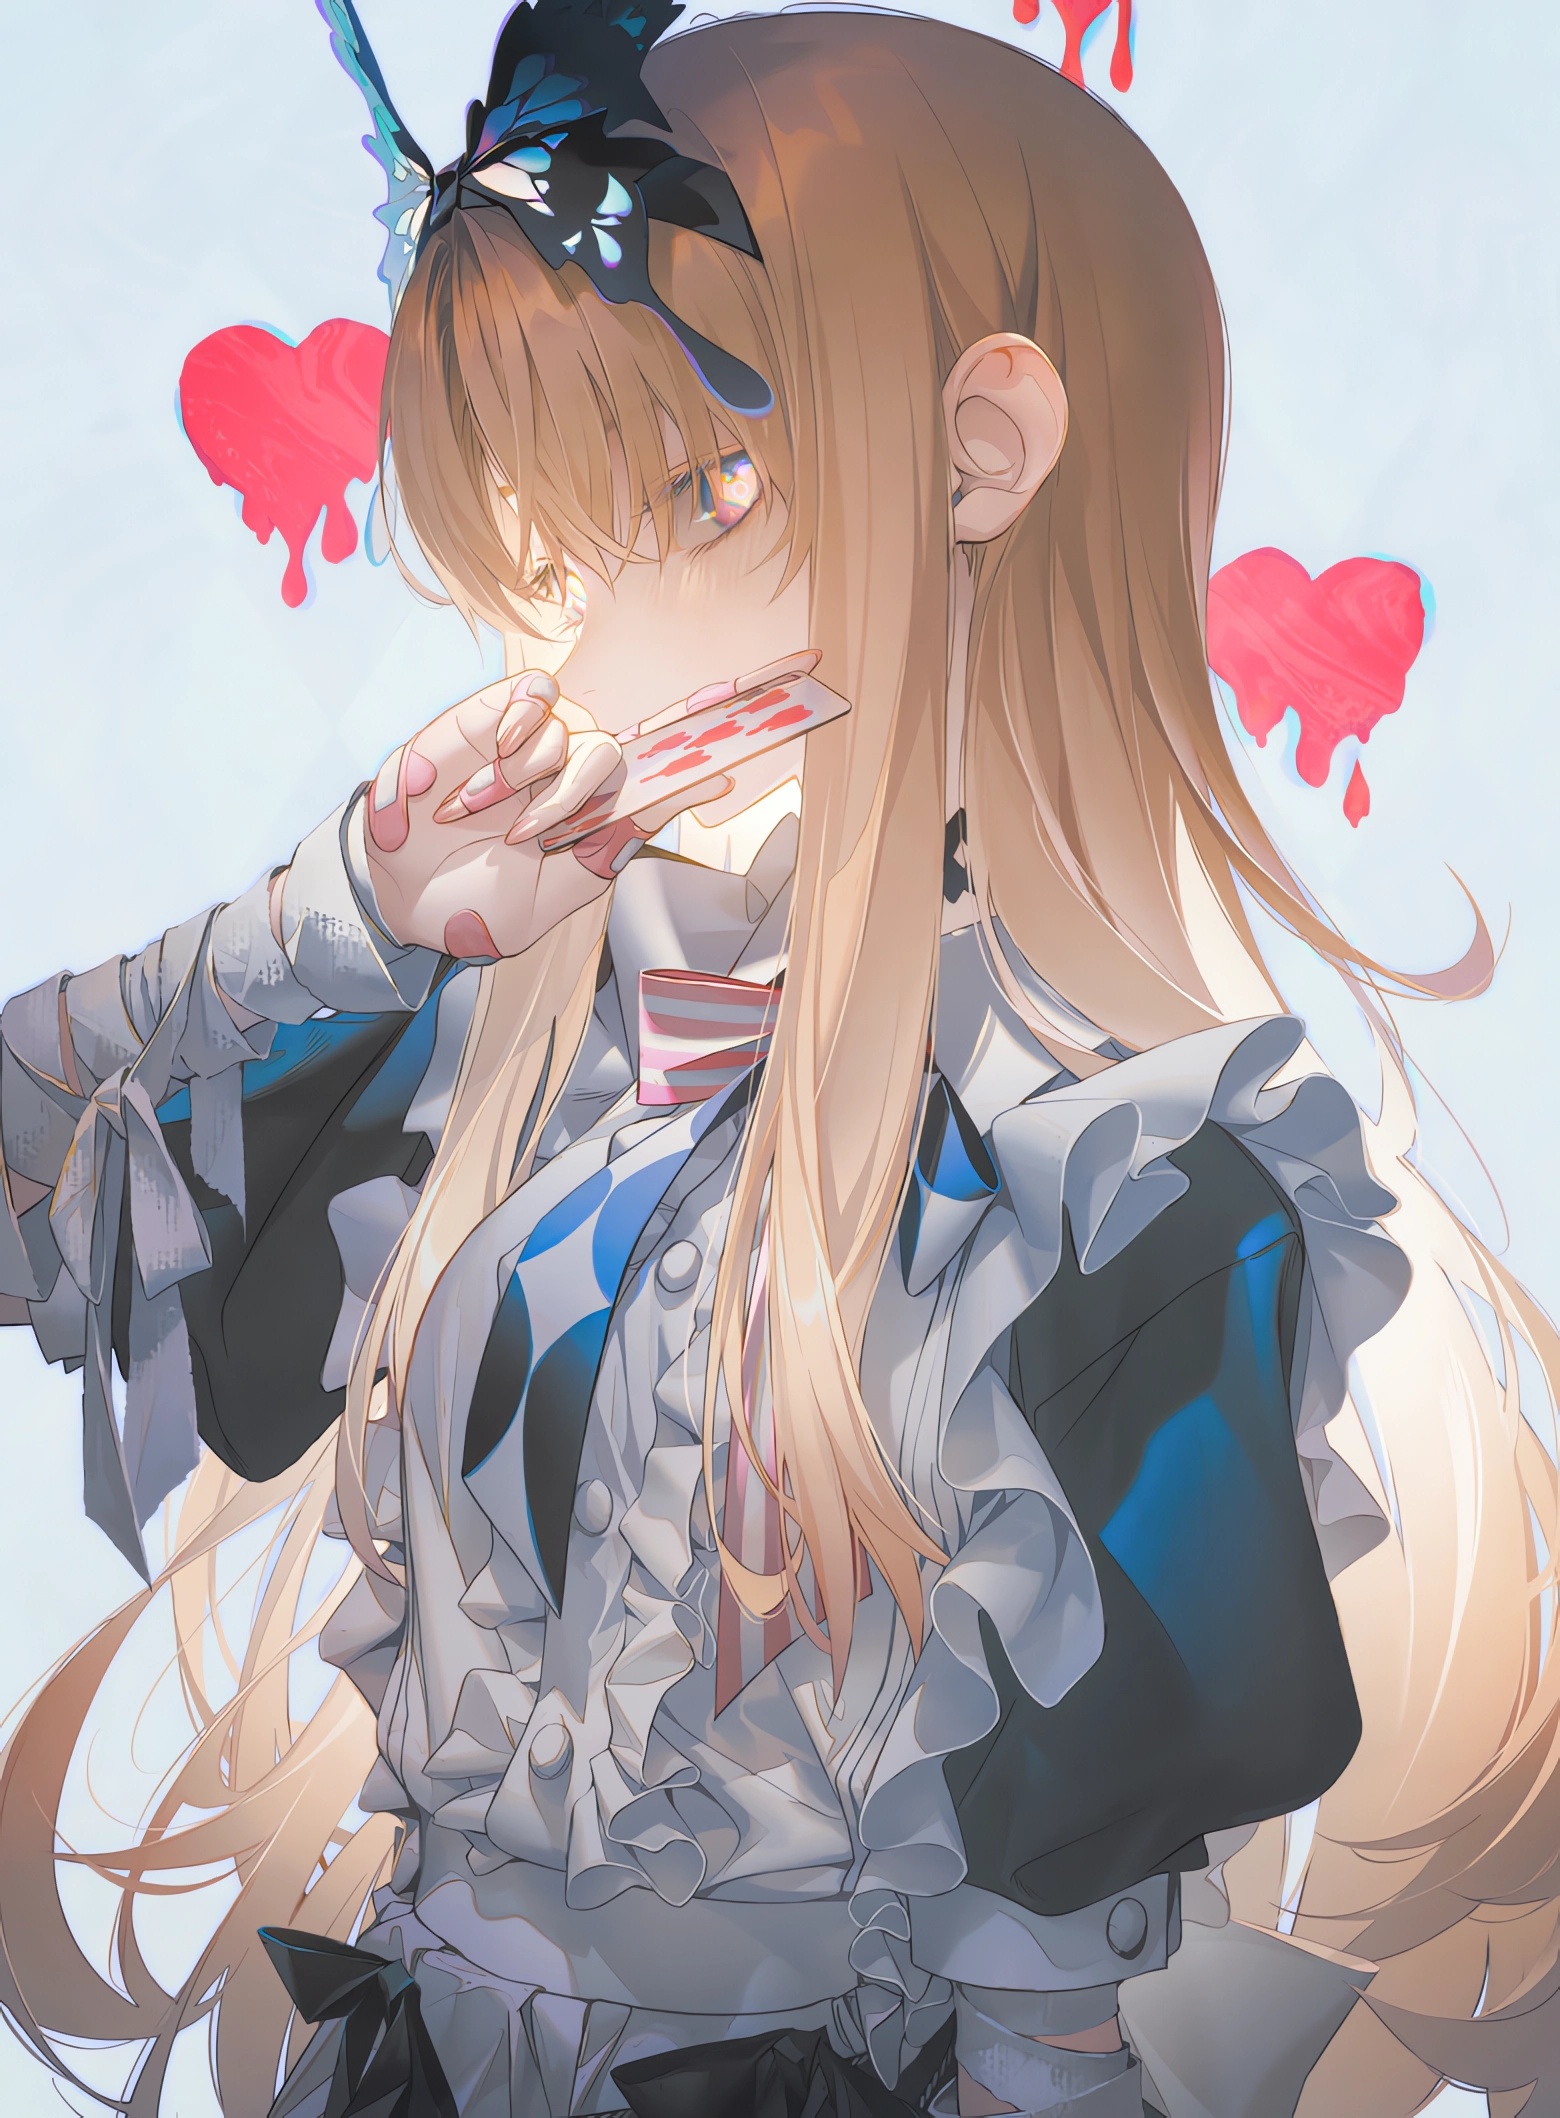 Anime 1560x2118 anime anime girls Pixiv Alice in Wonderland blonde heart eyes multi-colored hair cards looking at viewer heart dress bow tie frills portrait display Band-Aid simple background